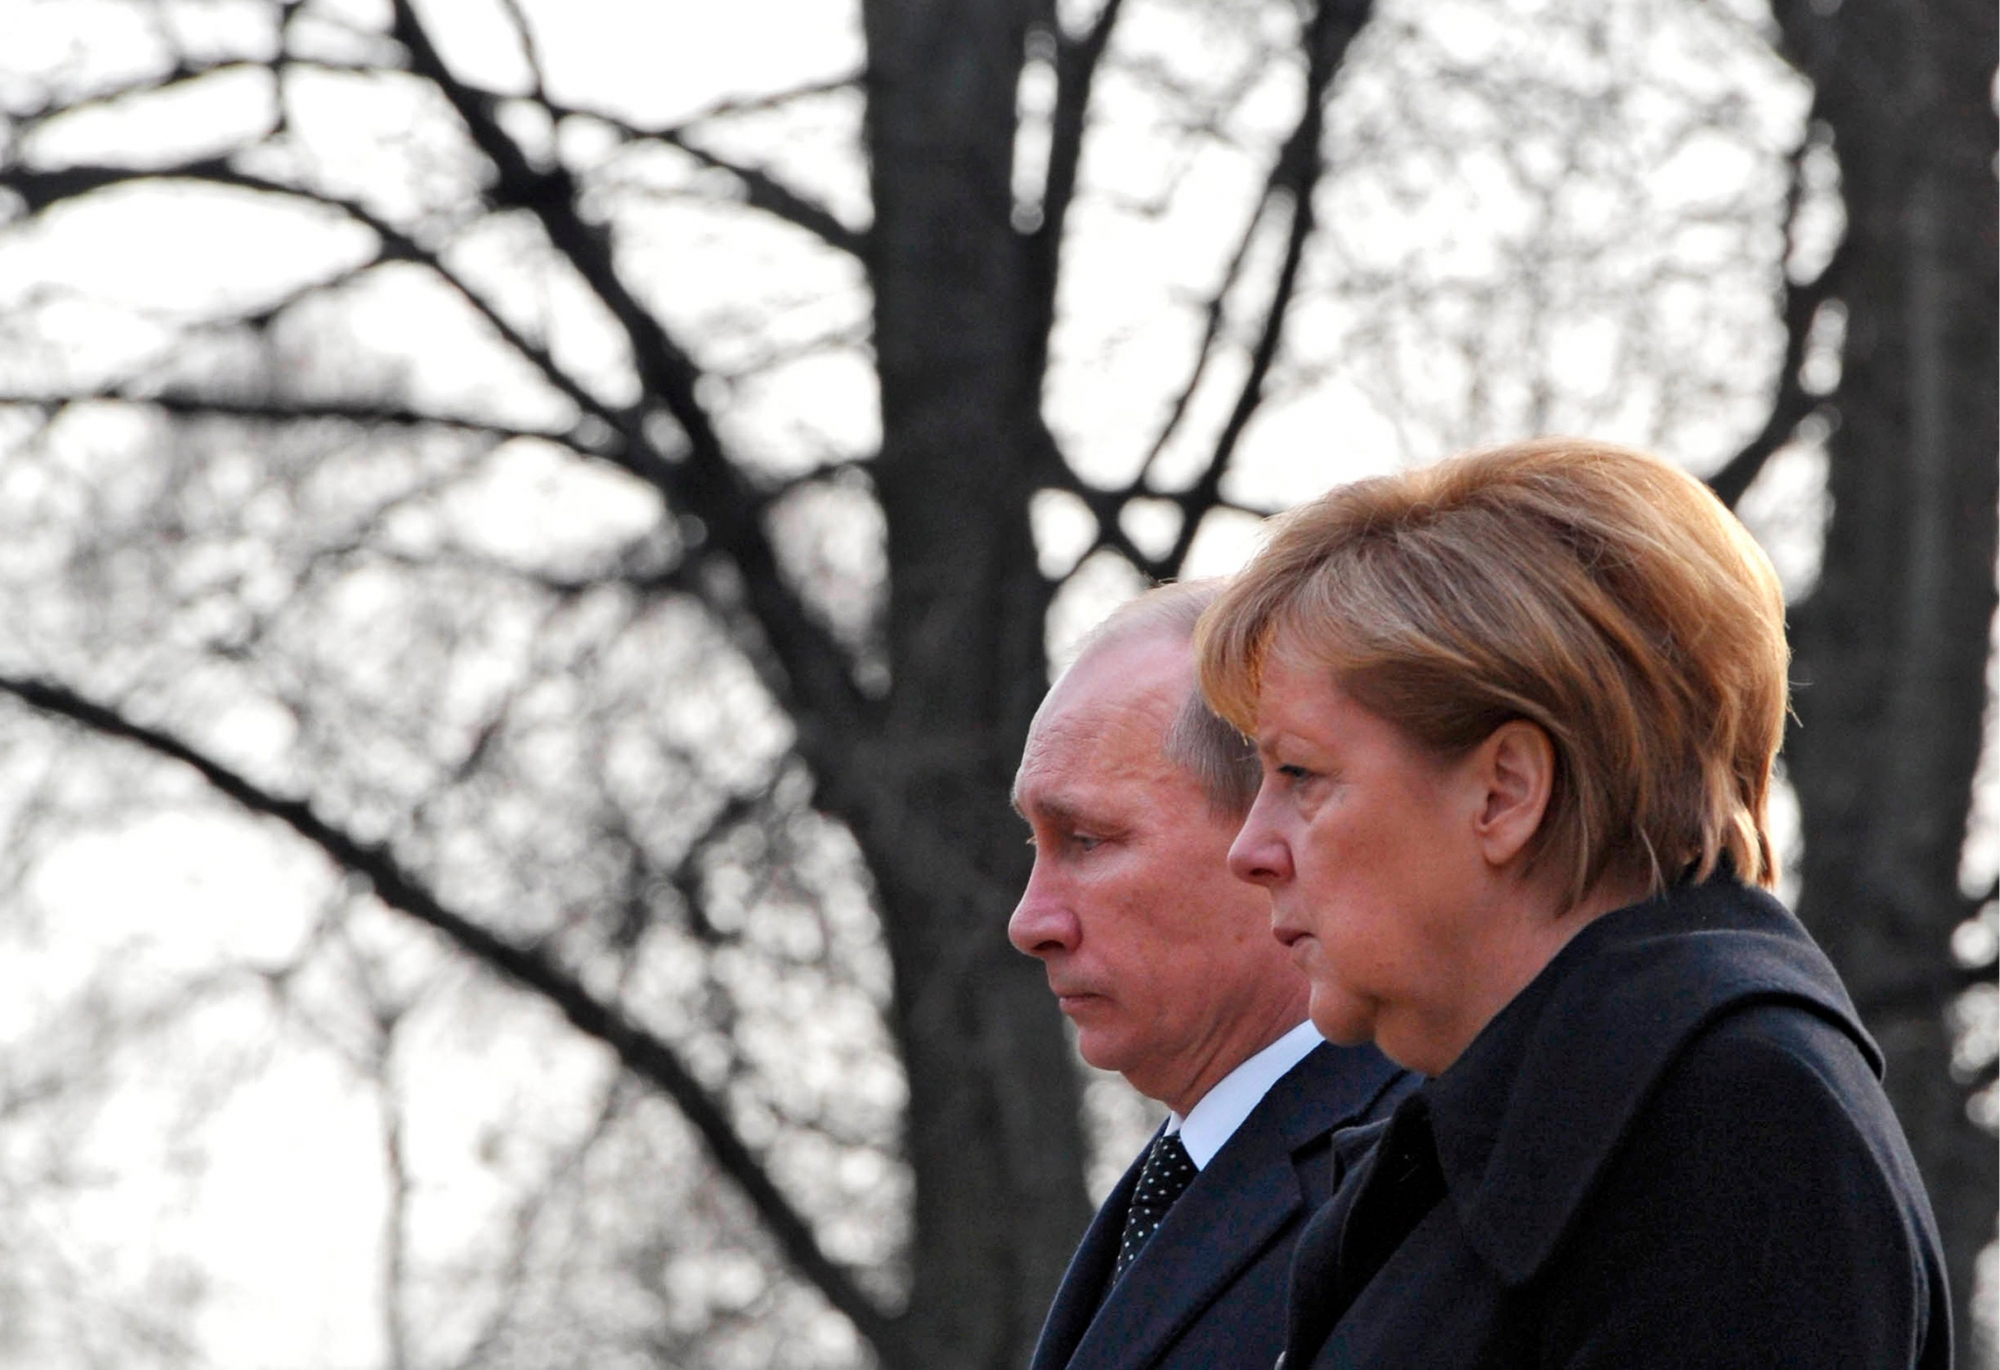 German Chancellor Angela Merkel, right, and Russian President Vladimir Putin lay a wreath at the Cemetery of Honor on the north bank of the Maschsee Lake in Hannover, central Germany, on Monday, April 8, 2013. Buried in this cemetery are 386 forced laborers from all over Europe, who were murdered by the Nazi regime near the end of the second World War in Hannover. (AP Photo/RIA Novosti, Alexei Druzhinin, Presidential Press Service, Pool) Germany Russia